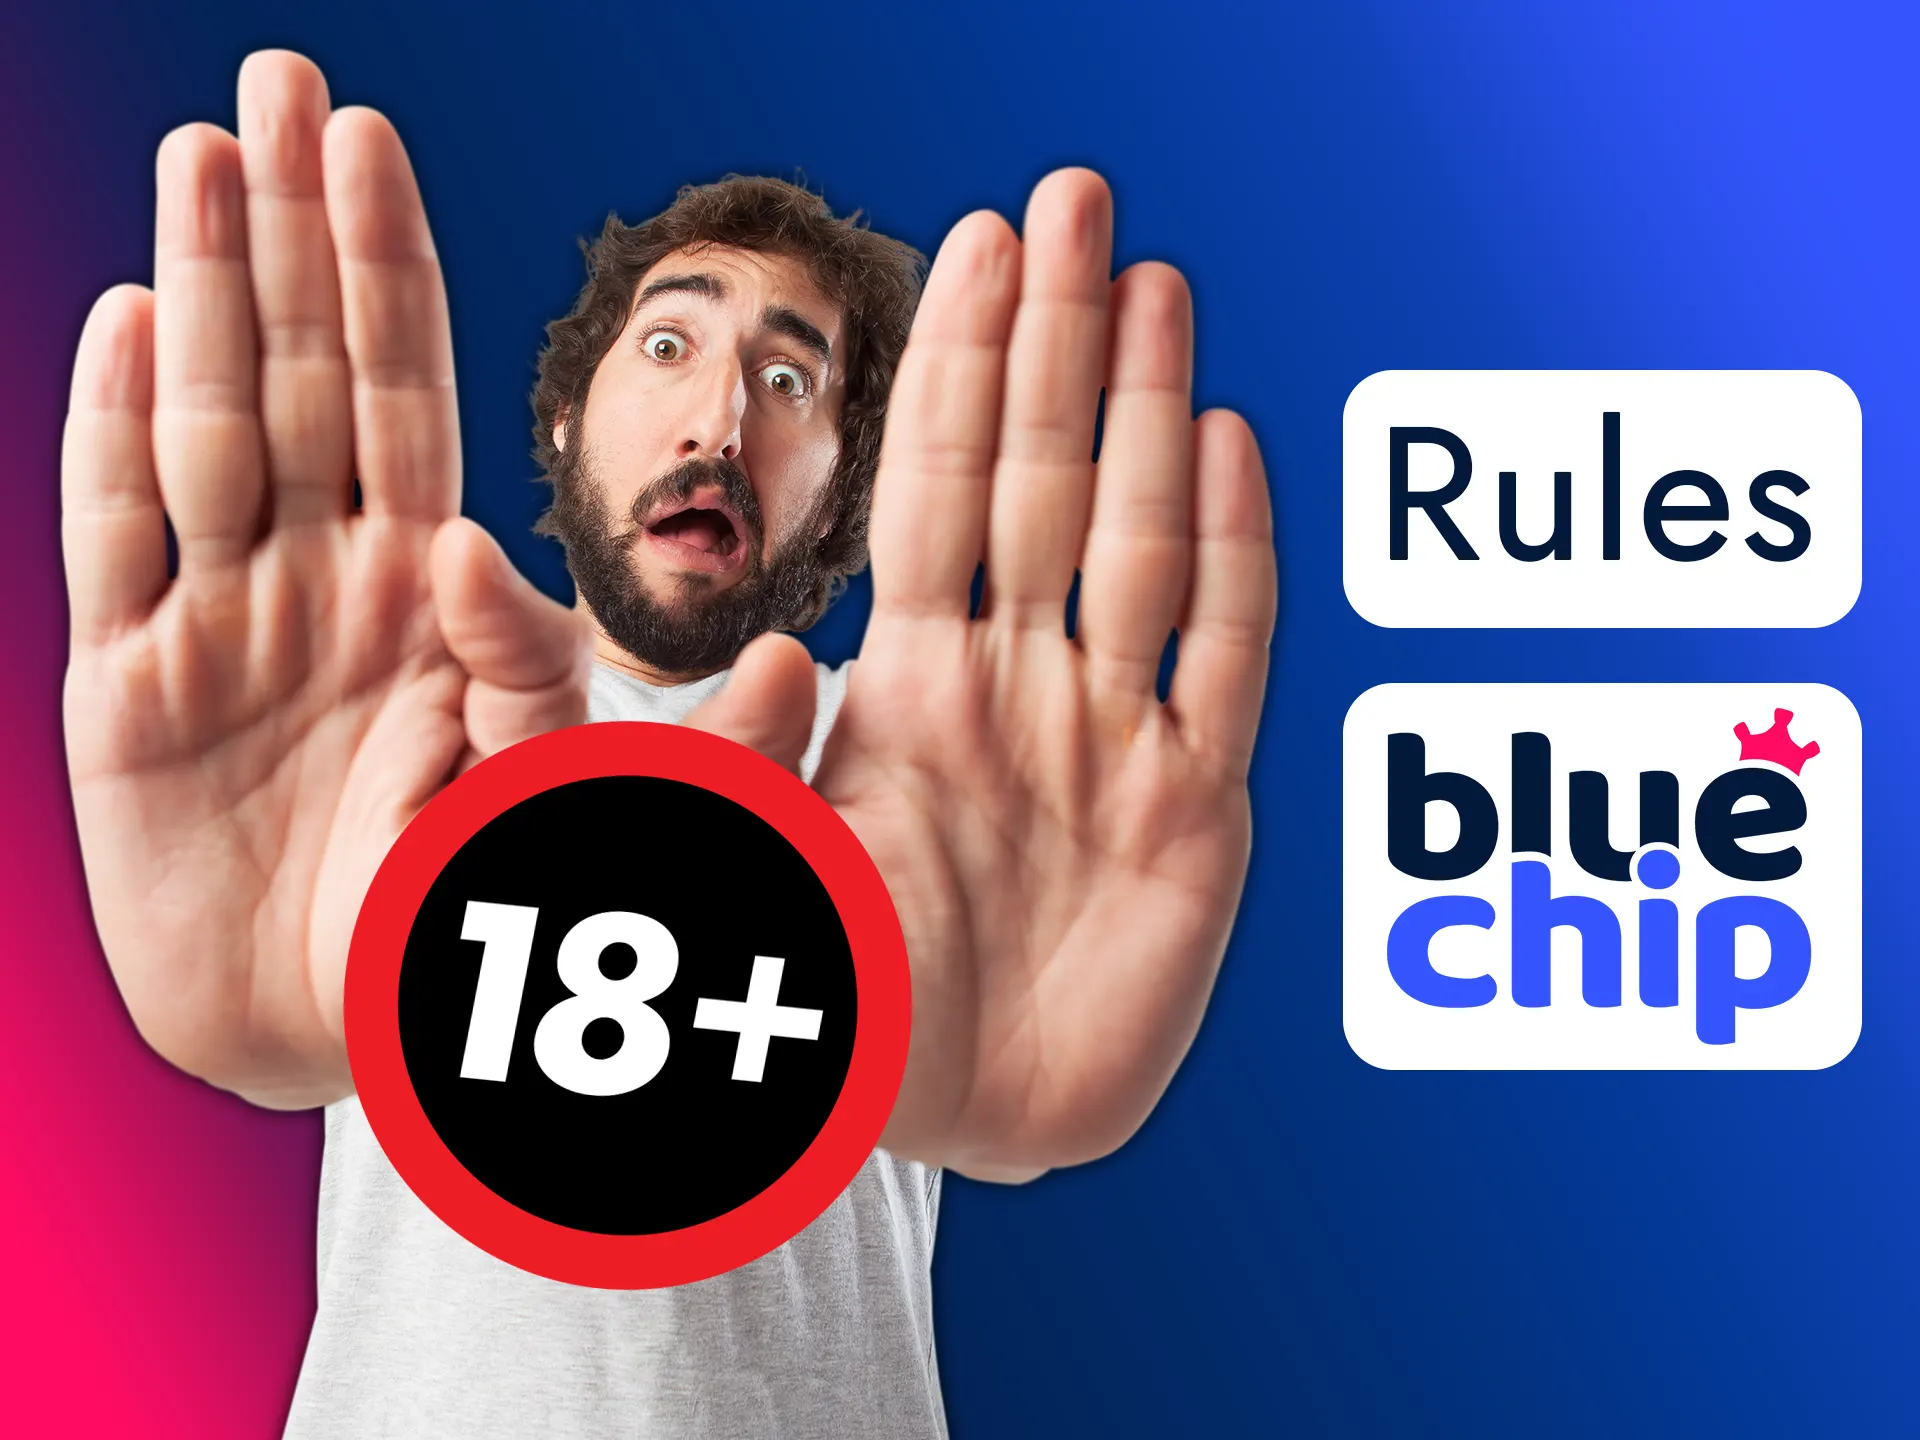 Learn Bluechip rules before start betting.